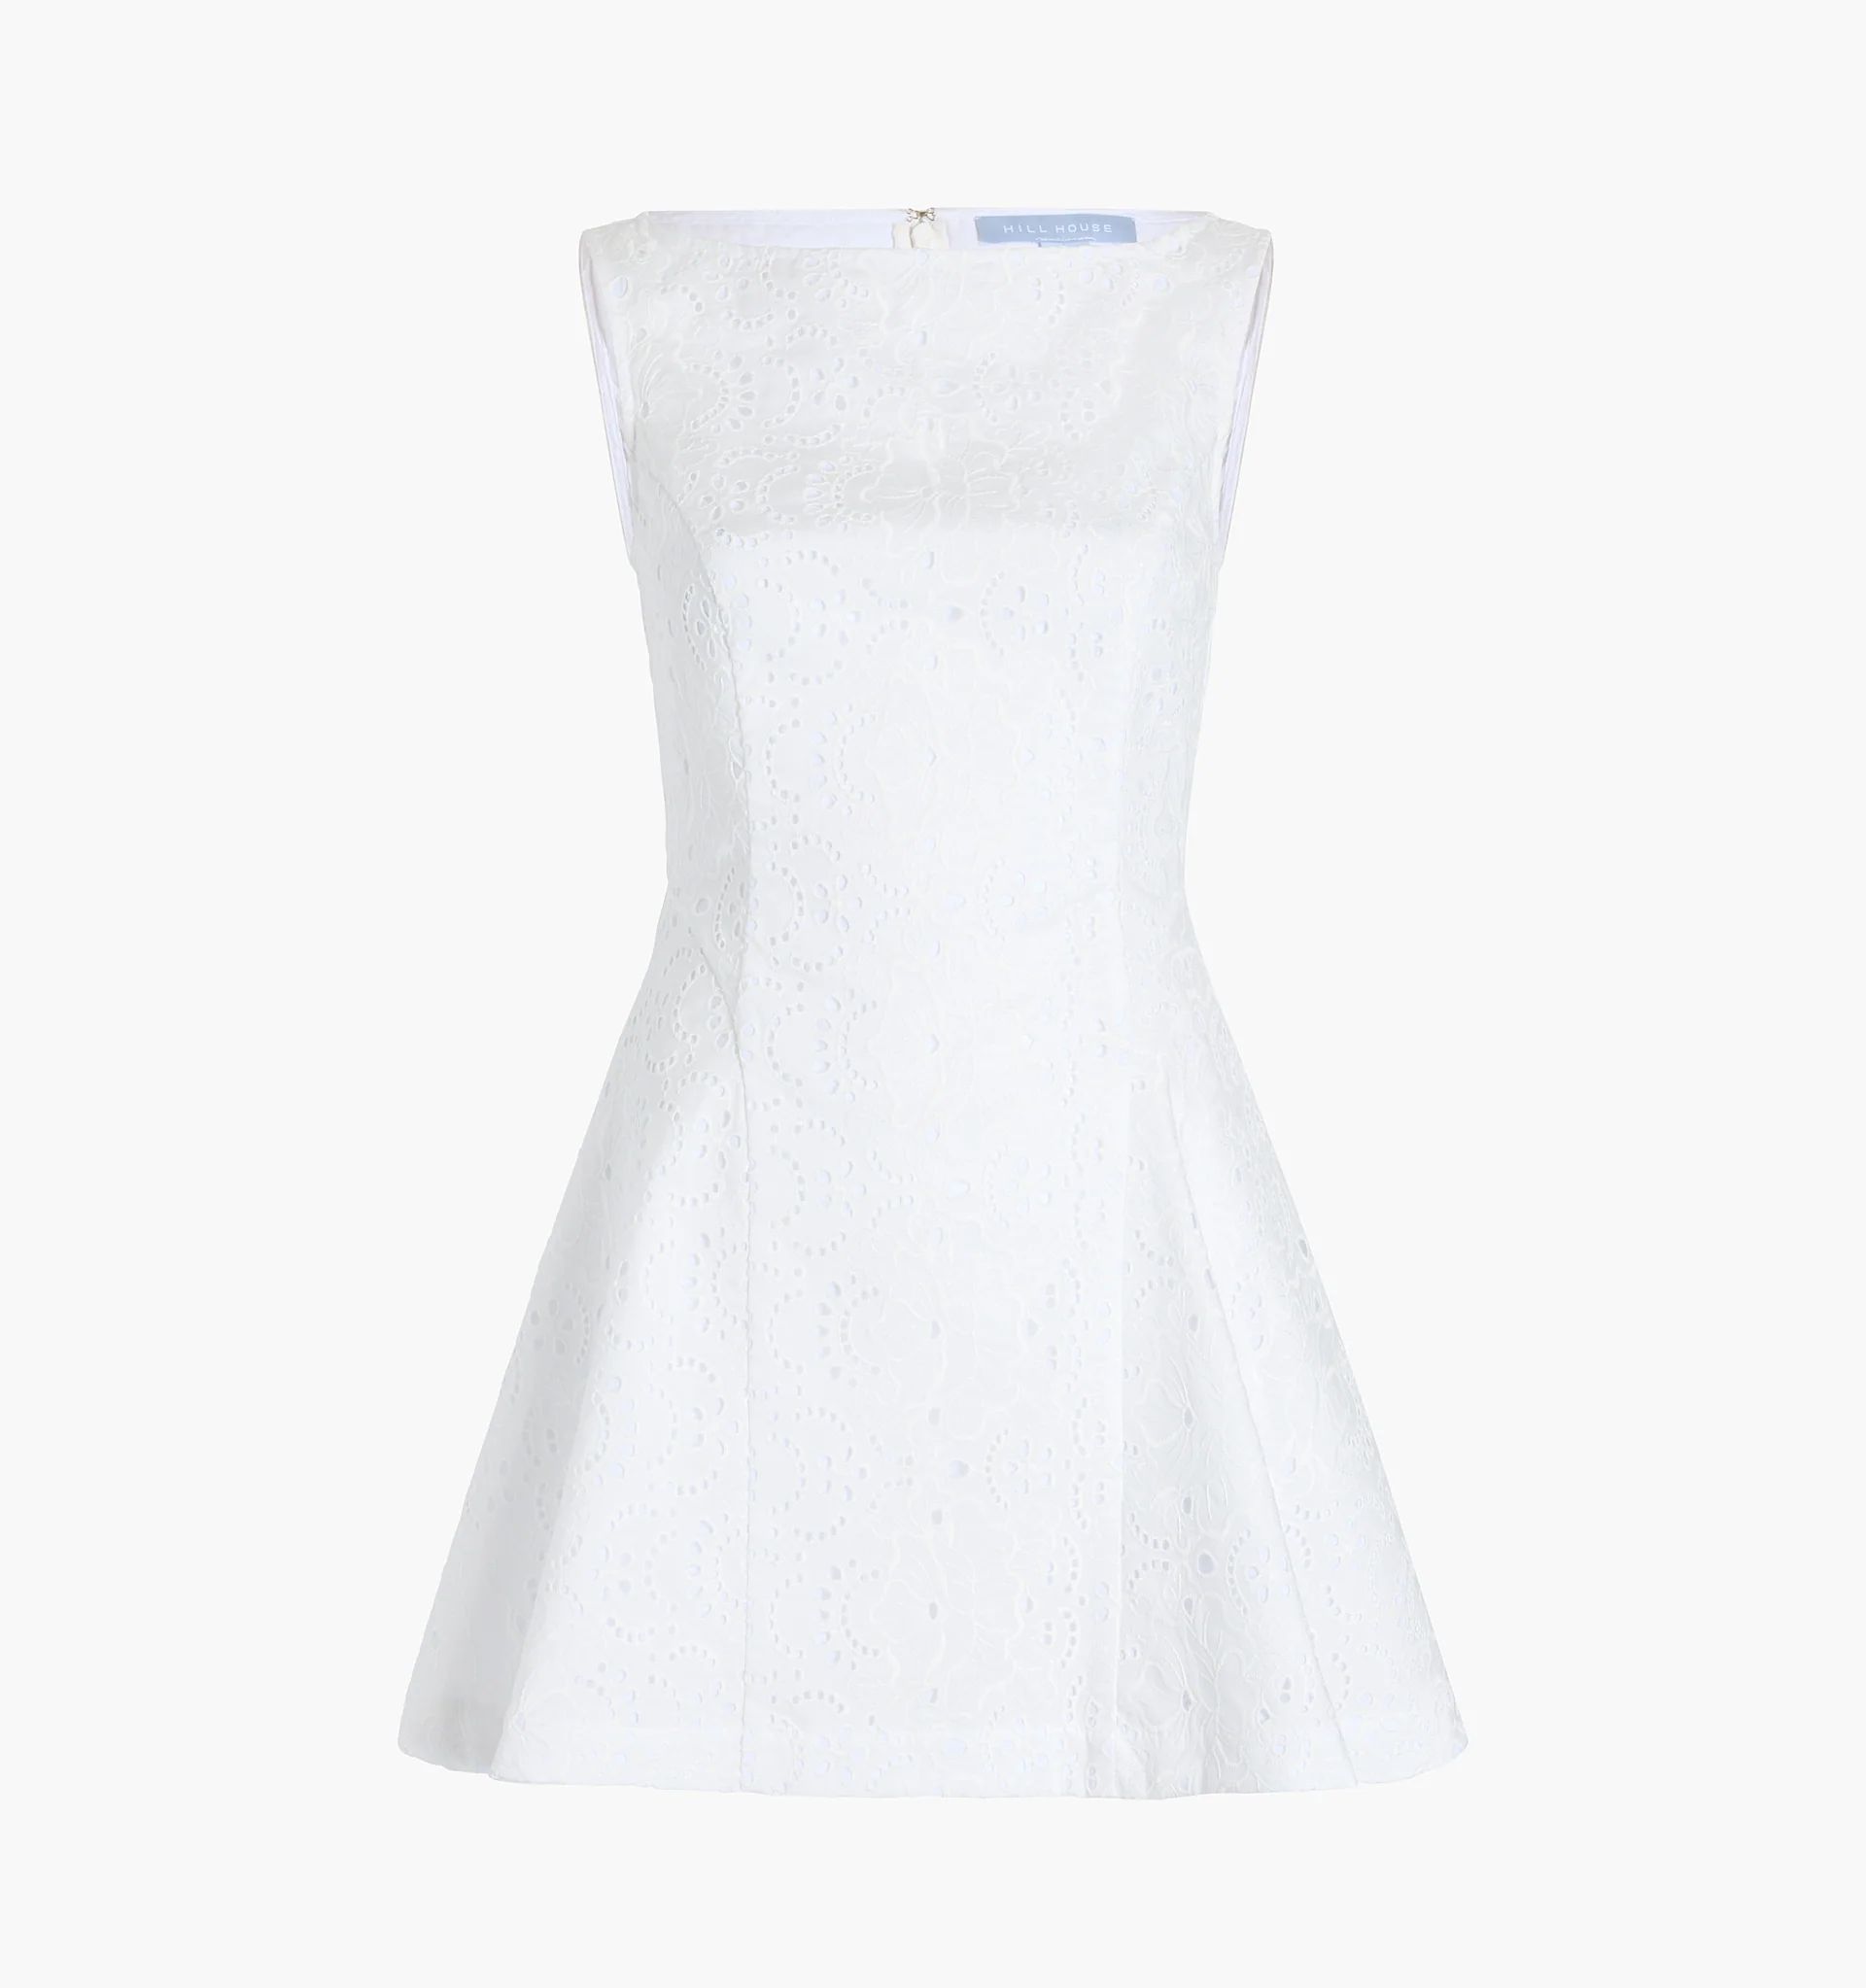 The Sutton Dress - White Broderie Anglaise | Hill House Home